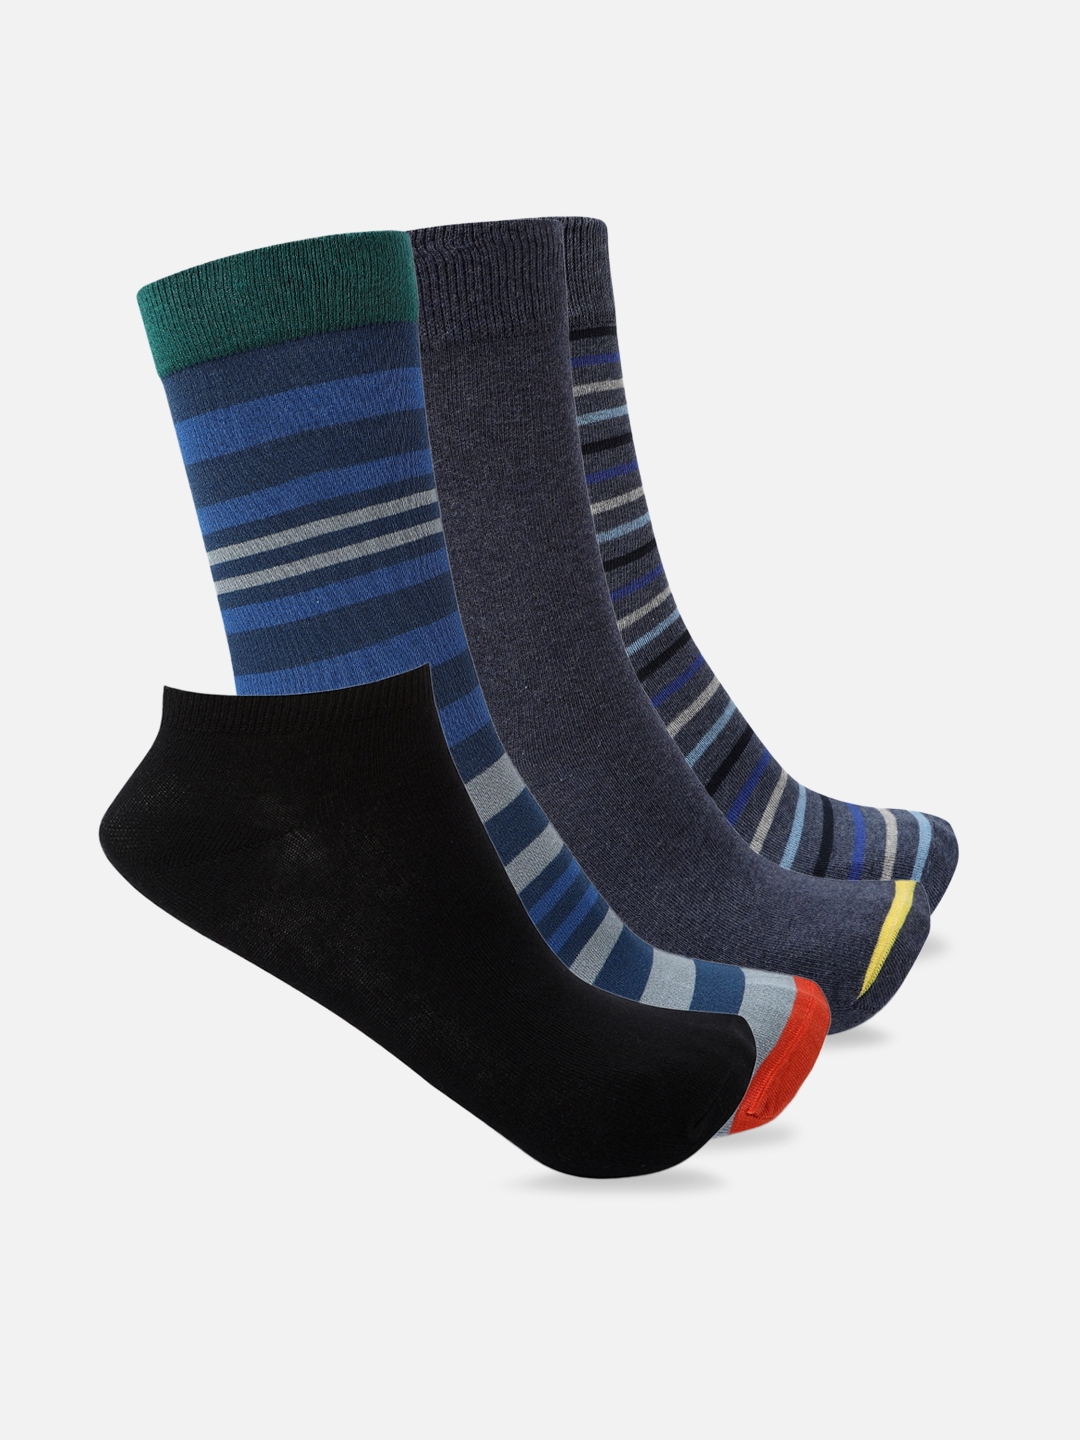 Smarty Pants | Smarty Pants men's pack of 4 solid and printed cotton socks. 